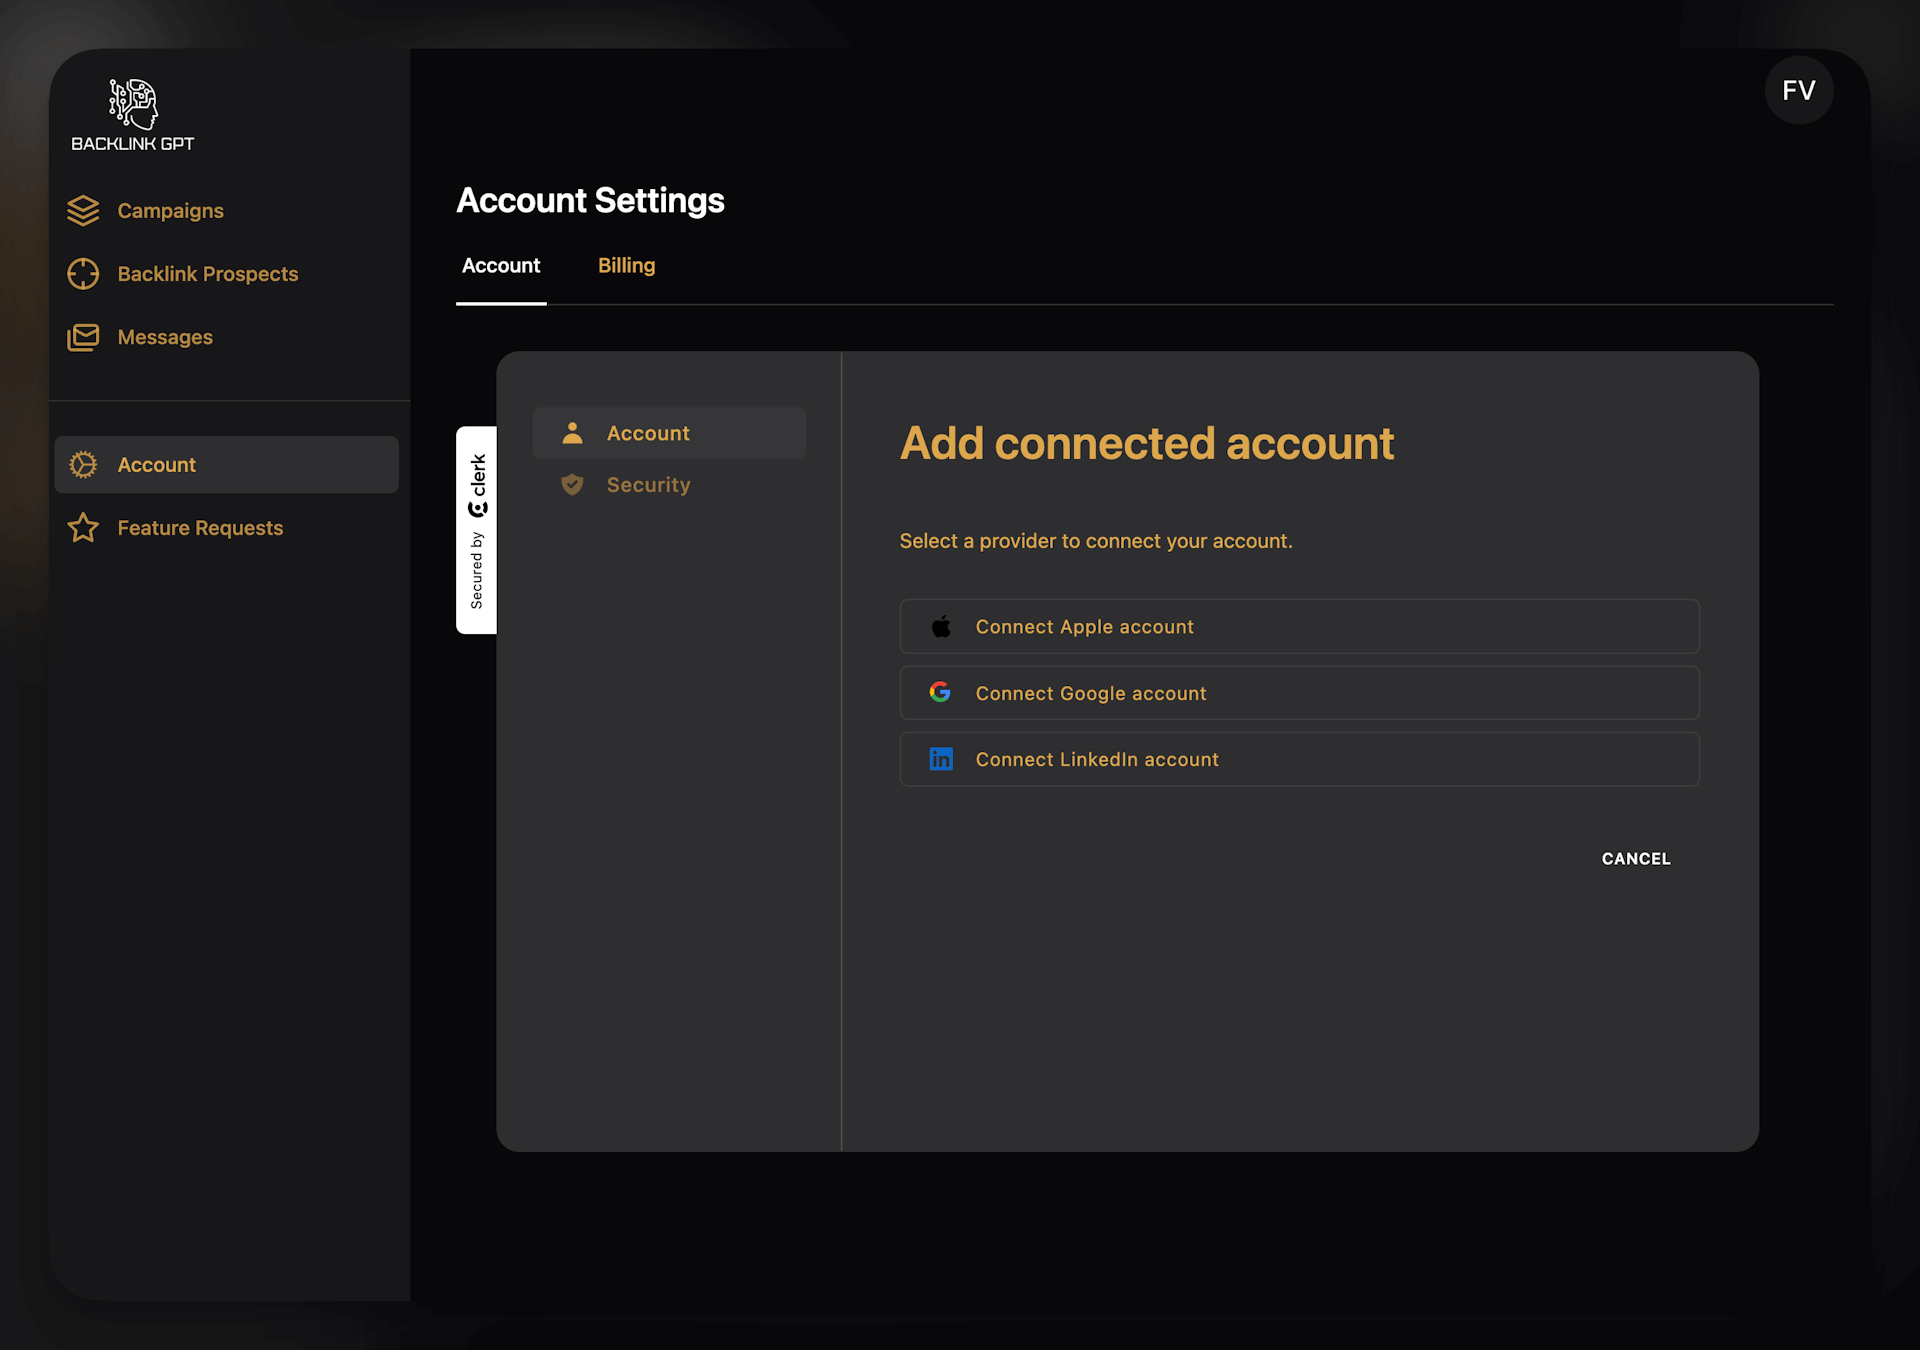 Connecting other accounts.